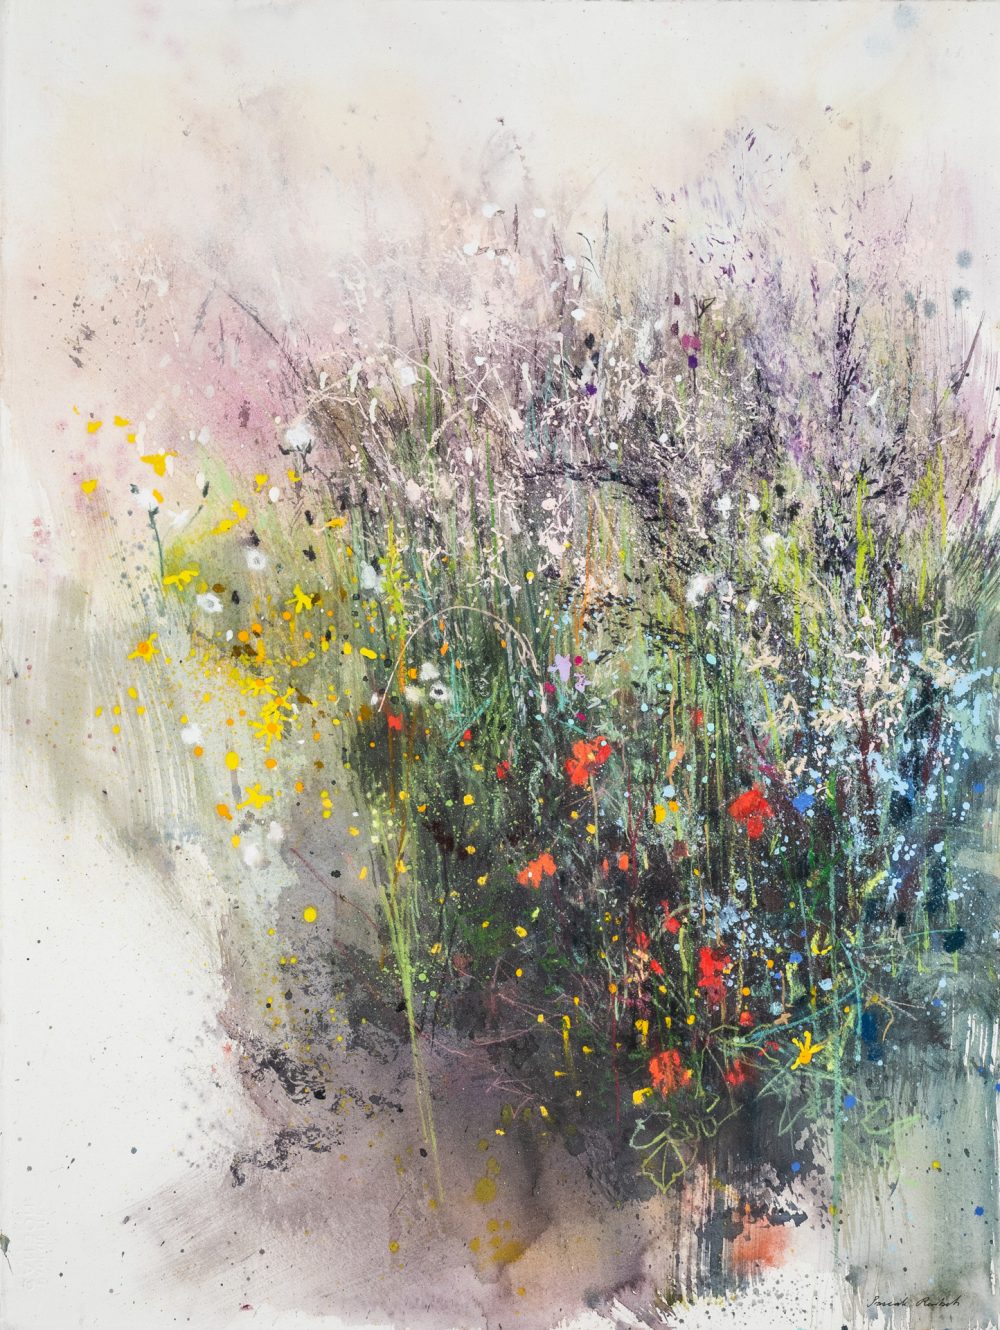 Where the Wildflowers Grow, original painting by Pascale Rentsch RSW